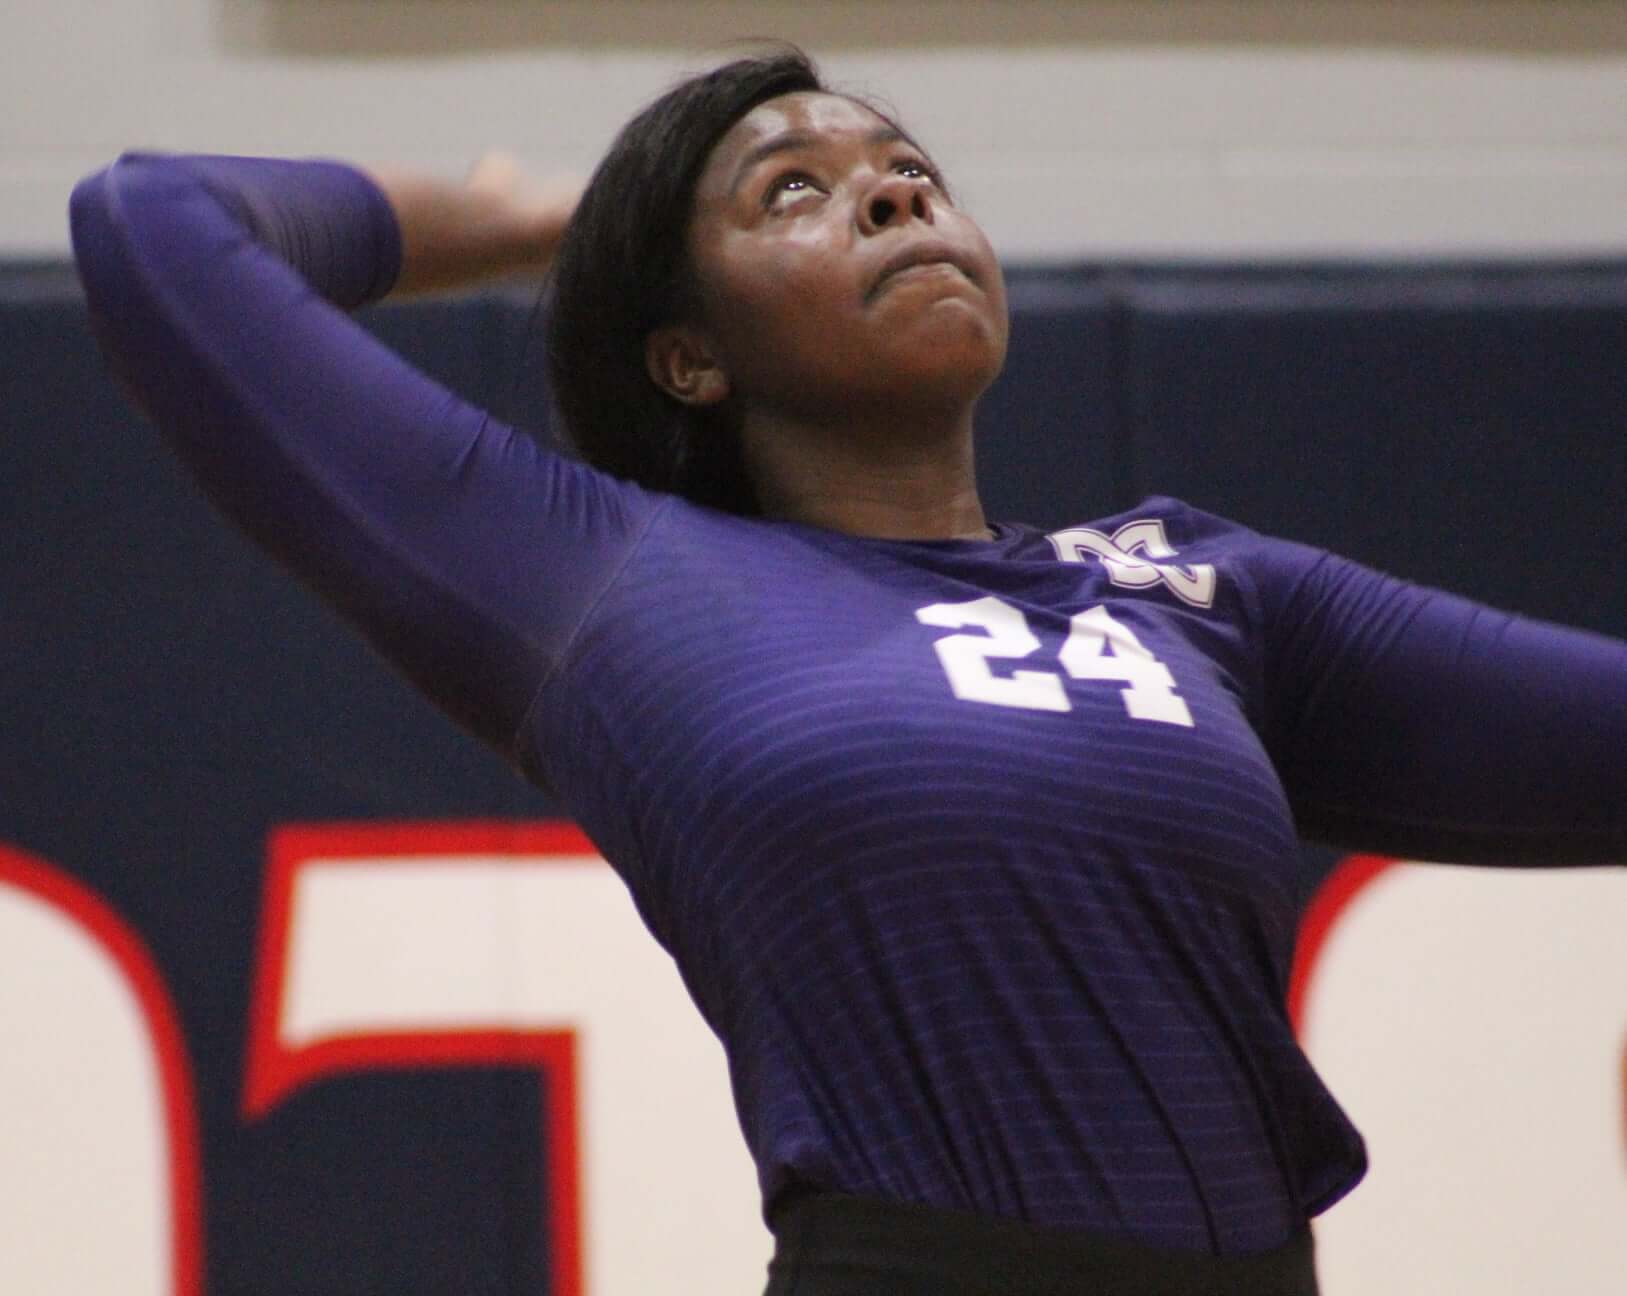 Silas an all-around leader for DeSoto Central